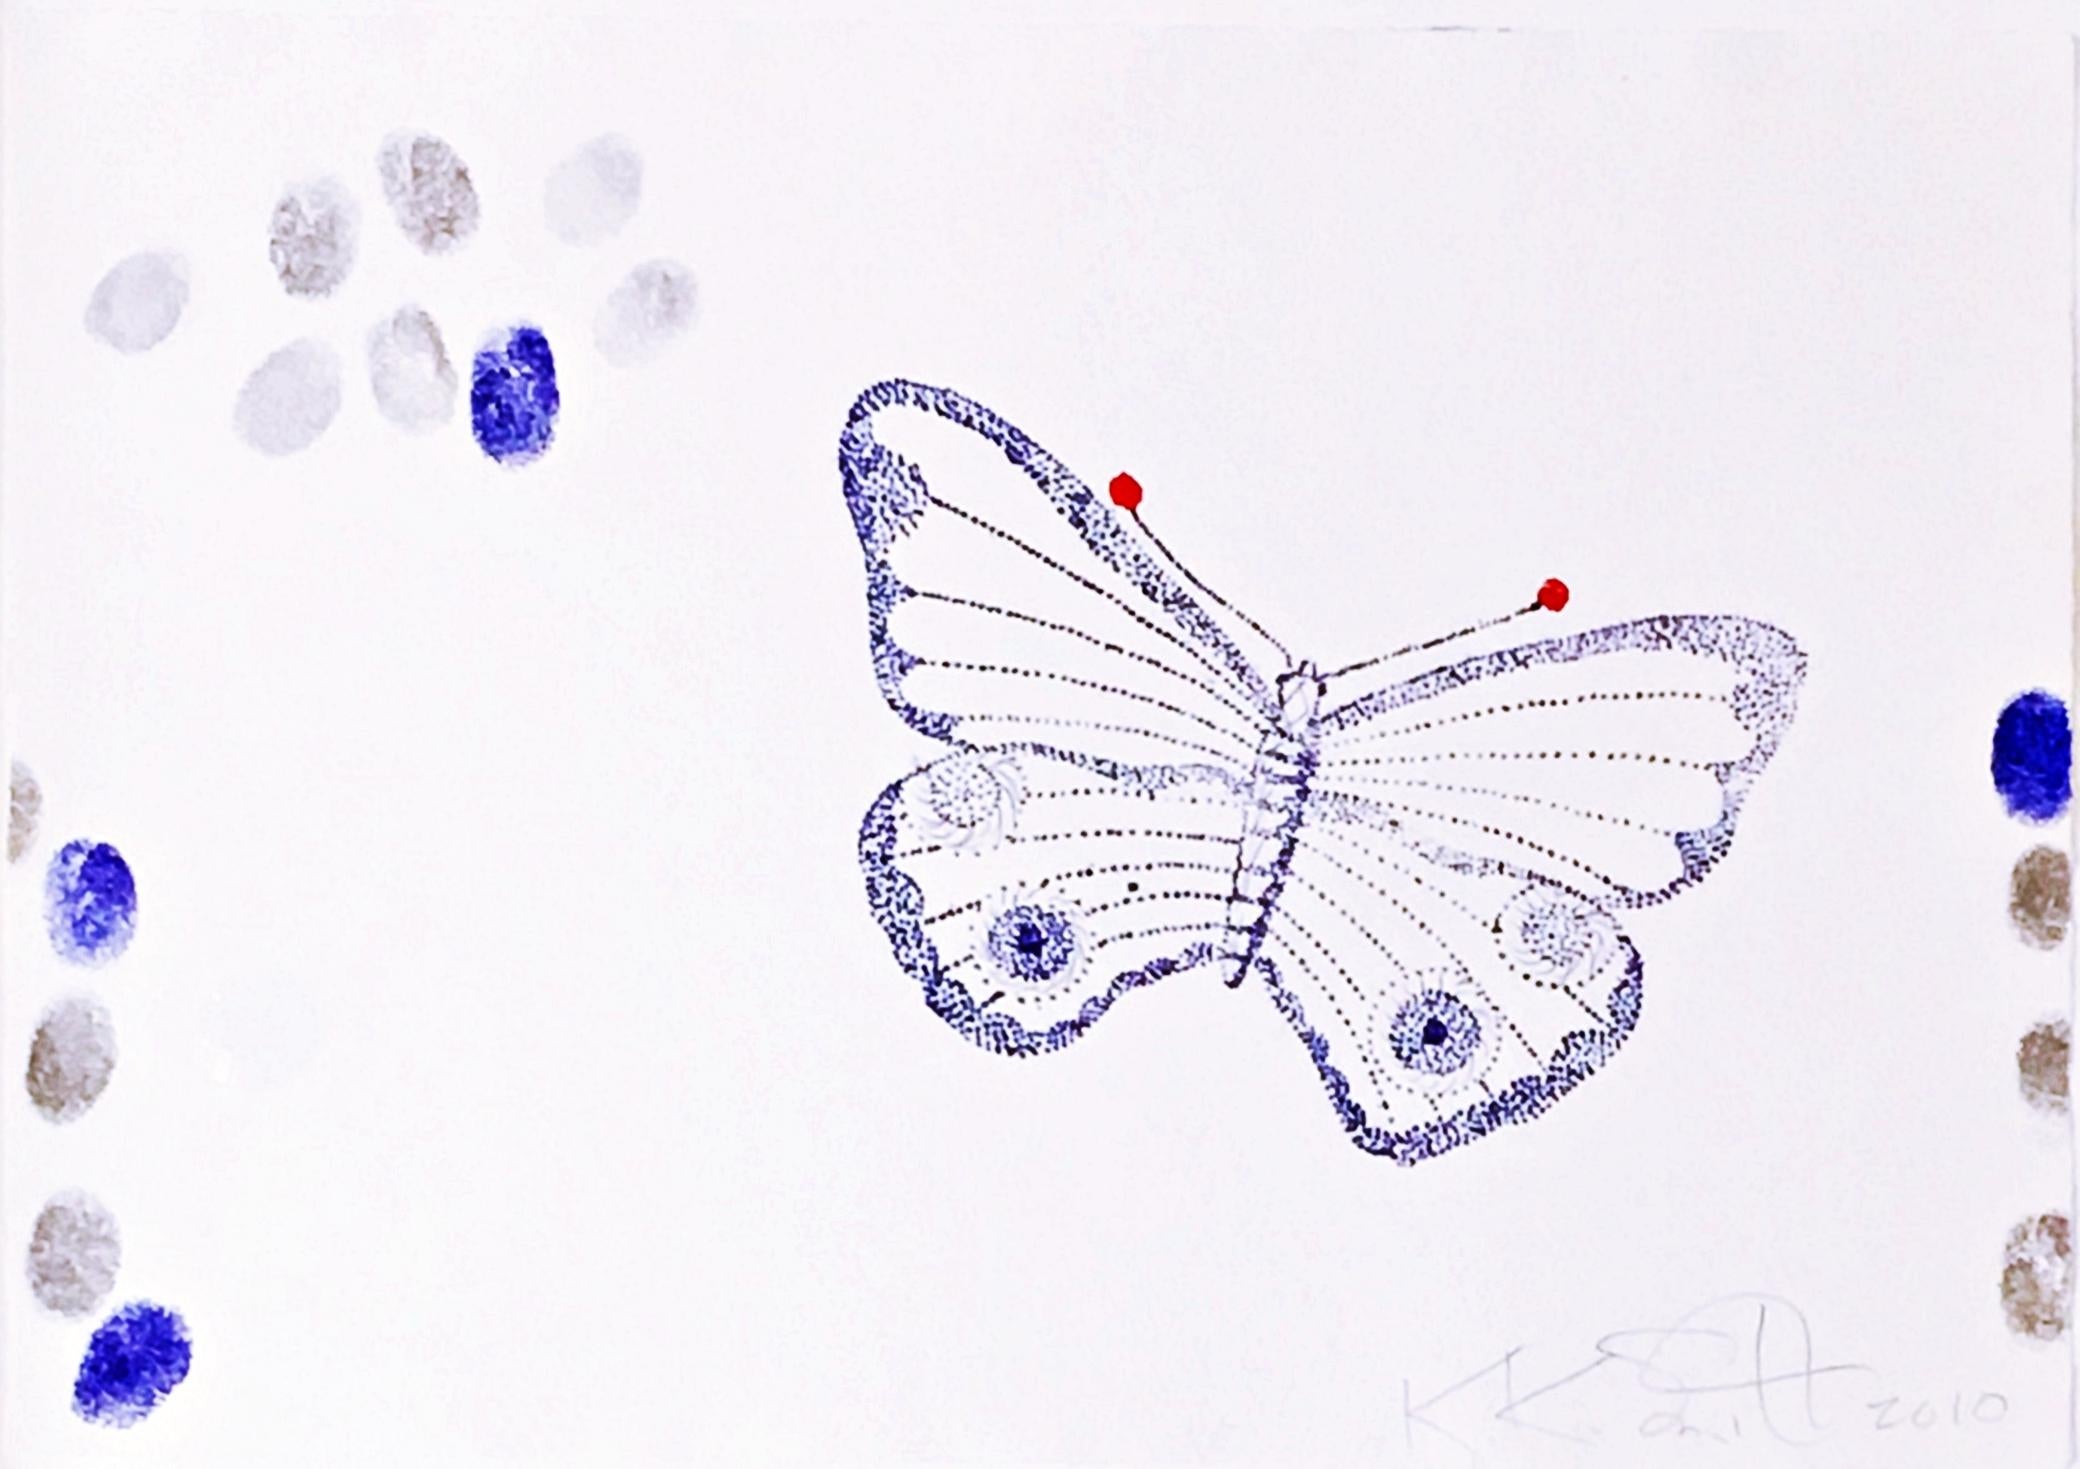 Butterfly with glitter, signed mixed media monoprint on watercolor paper, framed - Contemporary Mixed Media Art by Kiki Smith